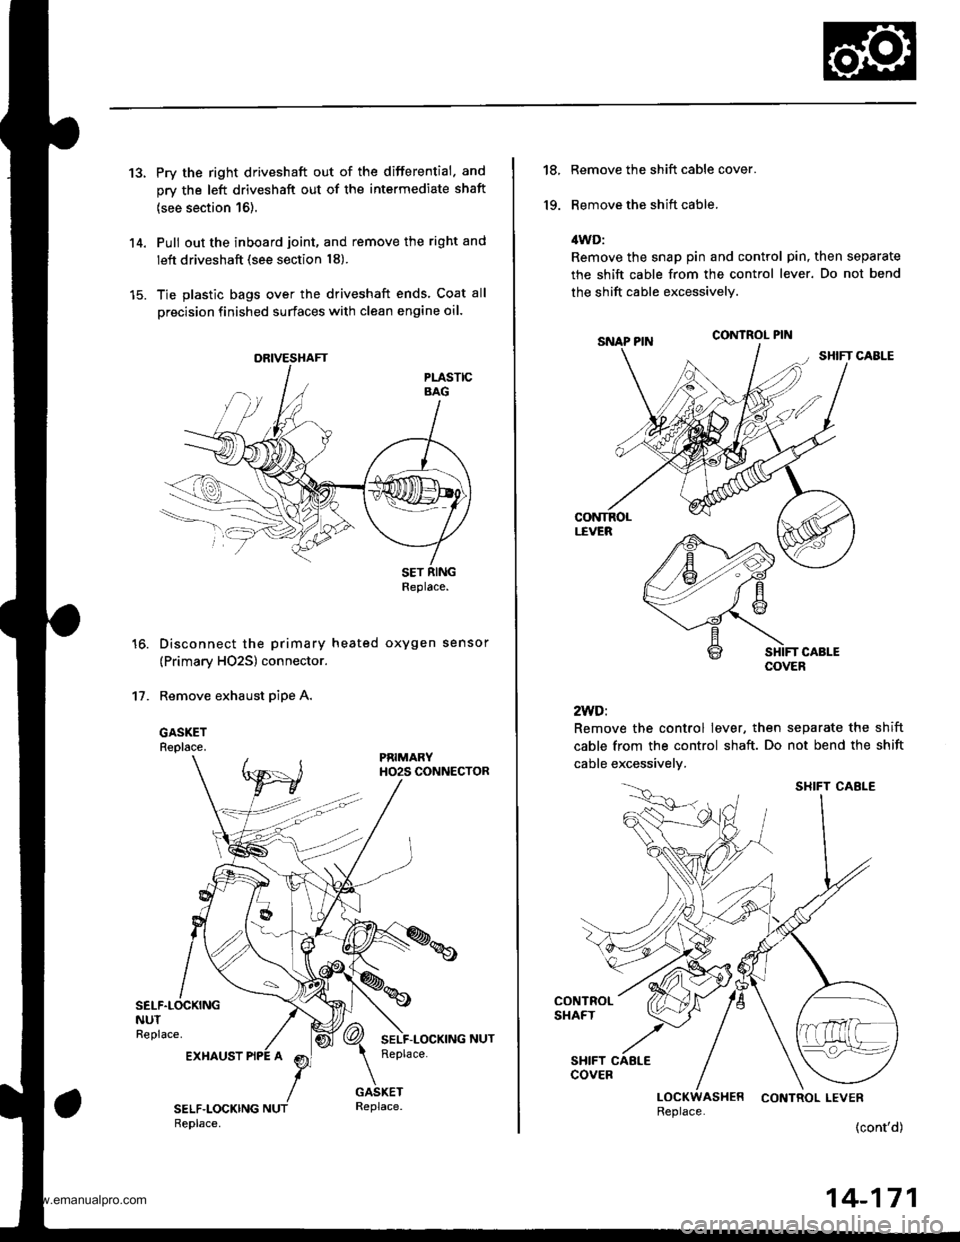 HONDA CR-V 1999 RD1-RD3 / 1.G Owners Guide 
13.Pry the right driveshaft out of the differential. and
orv the left driveshaft out of the intermediate shaft
{see section 16).
Pull out the inboard joint, and remove the right and
left driveshaft (